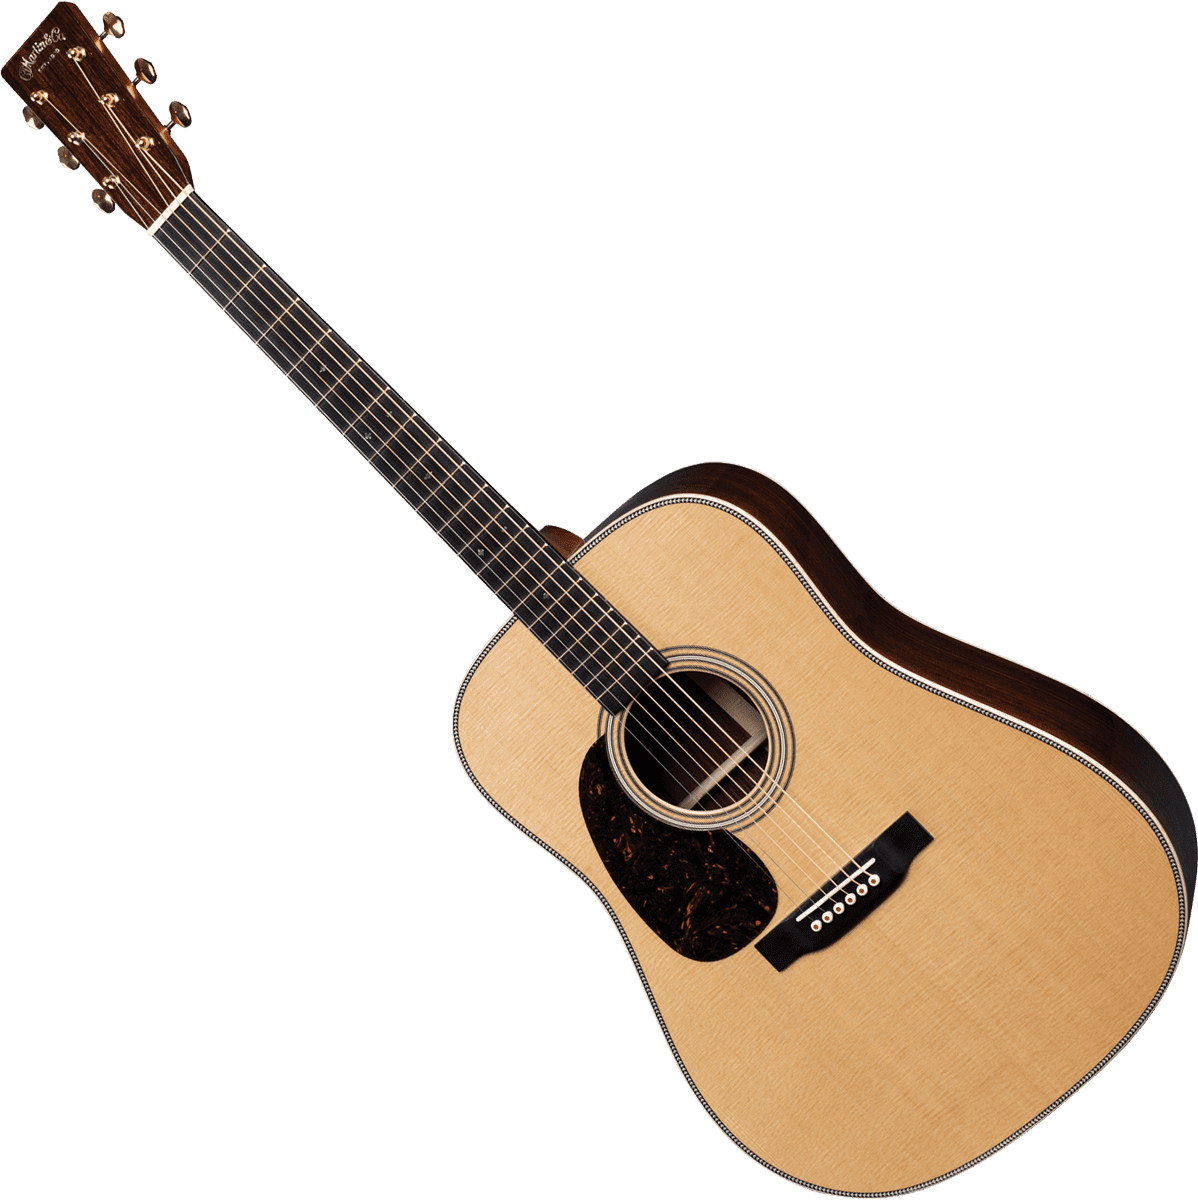 Martin / GUITARES ACOUSTIQUES / MODERN DELUXE / Dreadnought / D-28 Modern Deluxe D-28-MD-L